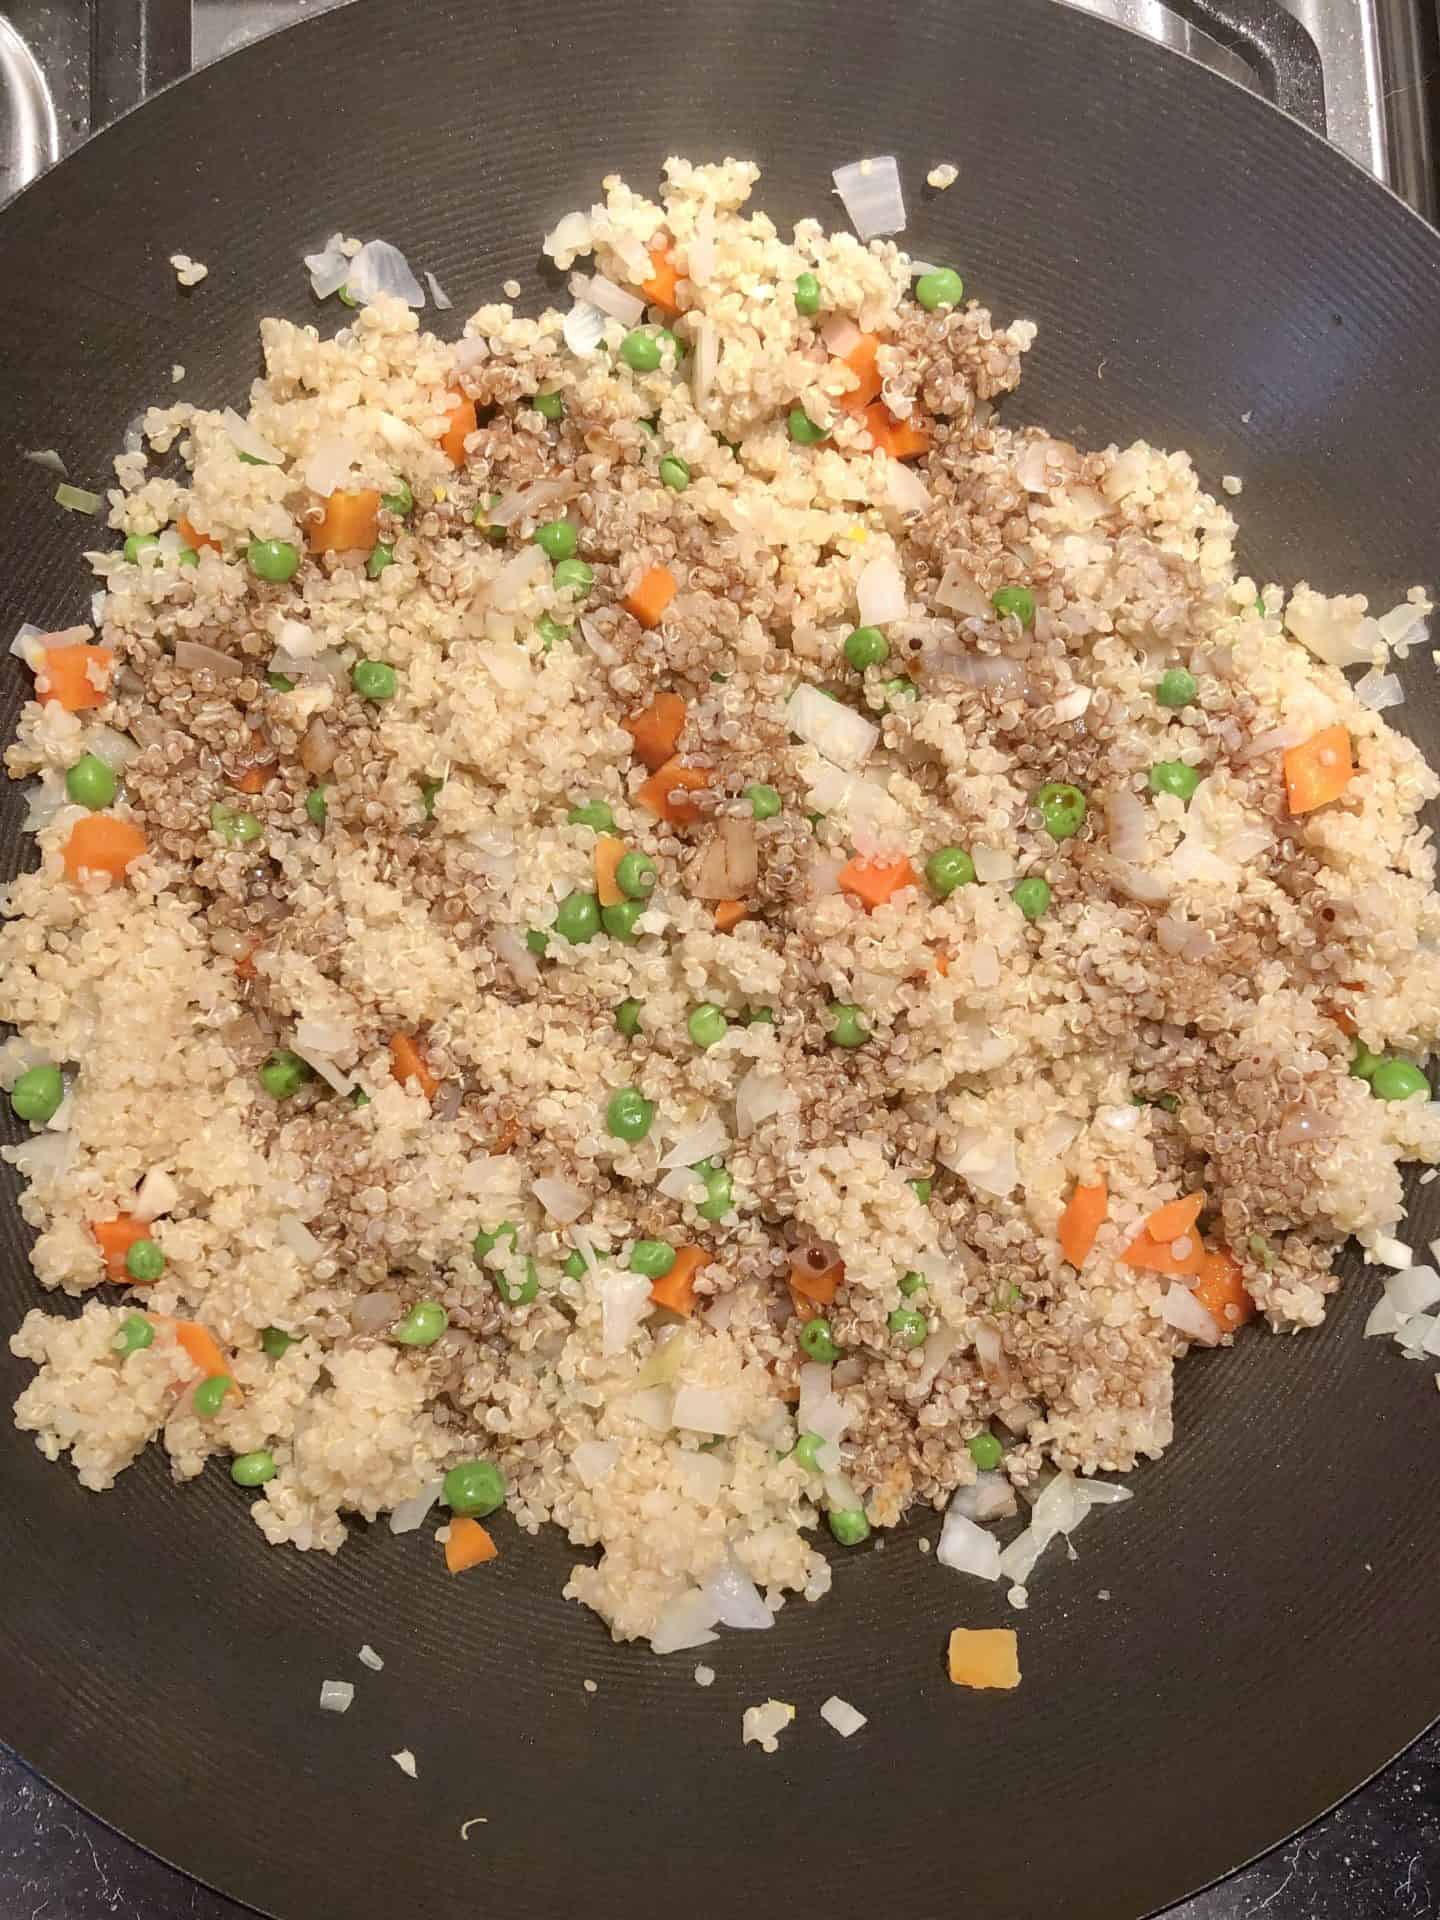 soy sauce drizzled over quinoa fried rice